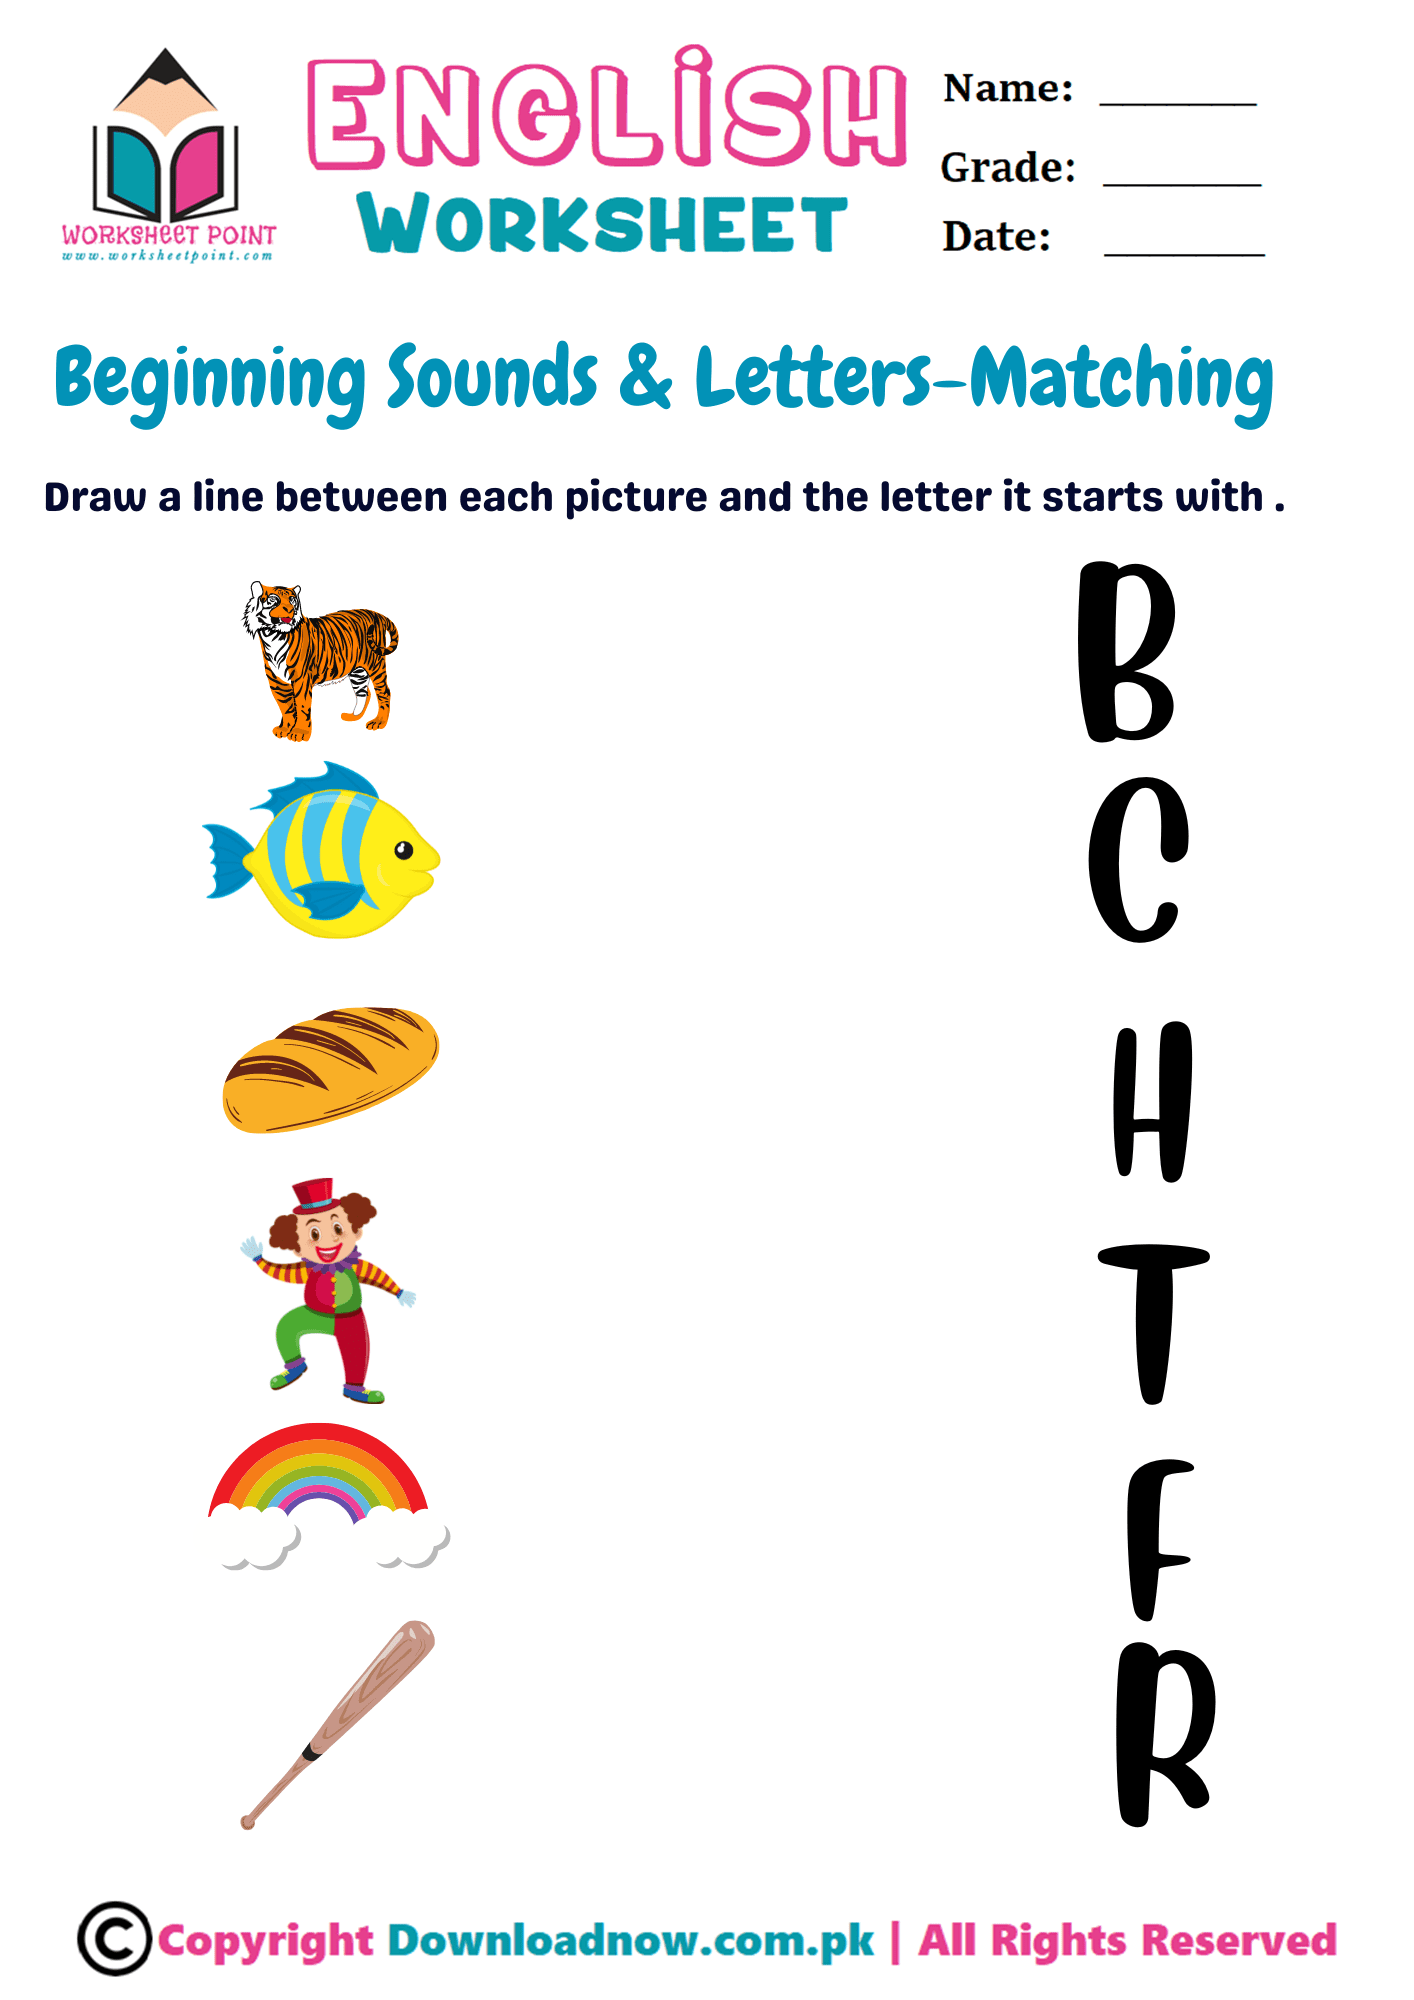 Rich Results on Google's SERP when searching for 'beginning sounds and letters matching (b)'